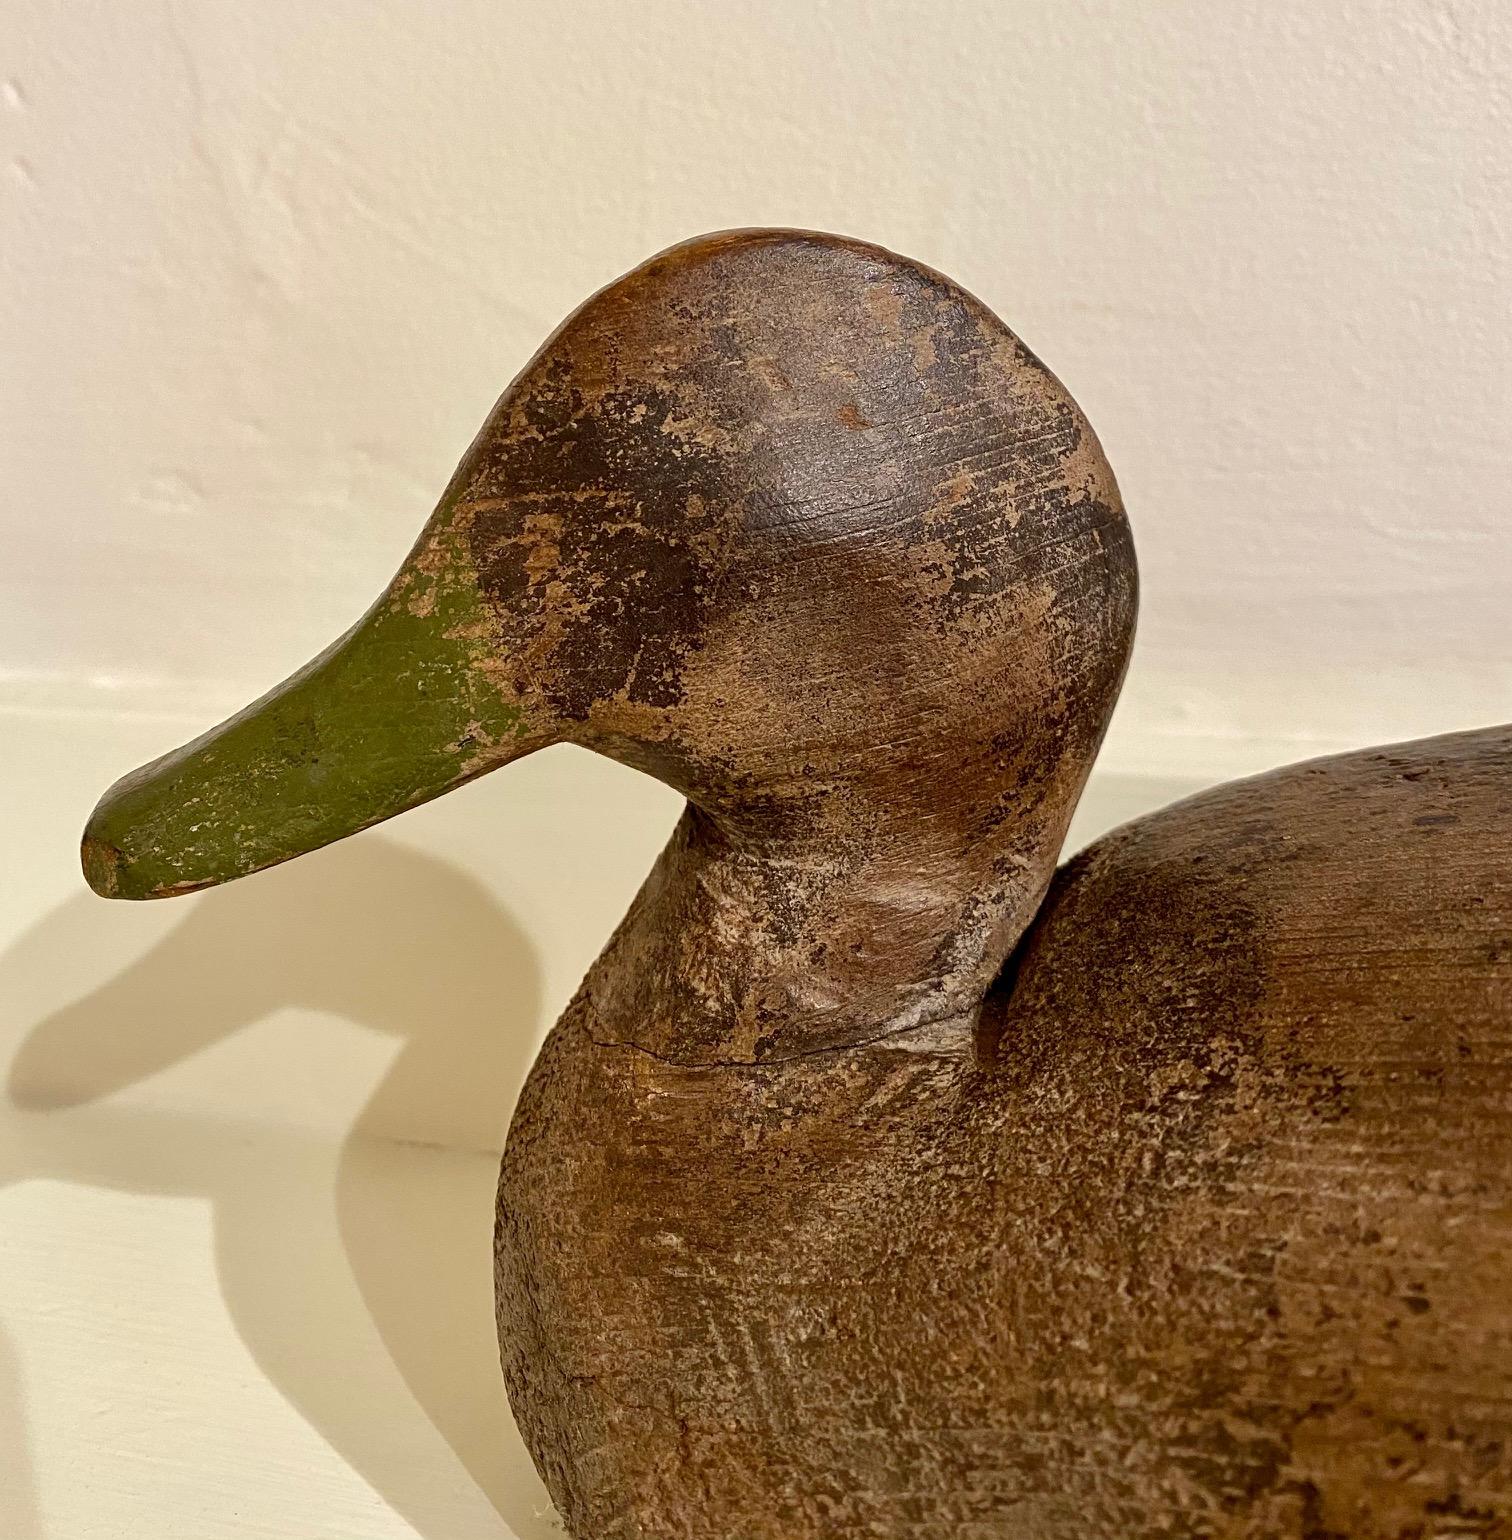 Antique Ward Brothers Widgeon Decoy, Early Period, circa 1920, having a hand whittled solid body in sloping posture, with set at distinct angle to the left, and high mounted thick paddle tail, in very worn original paint. The posture and angle of